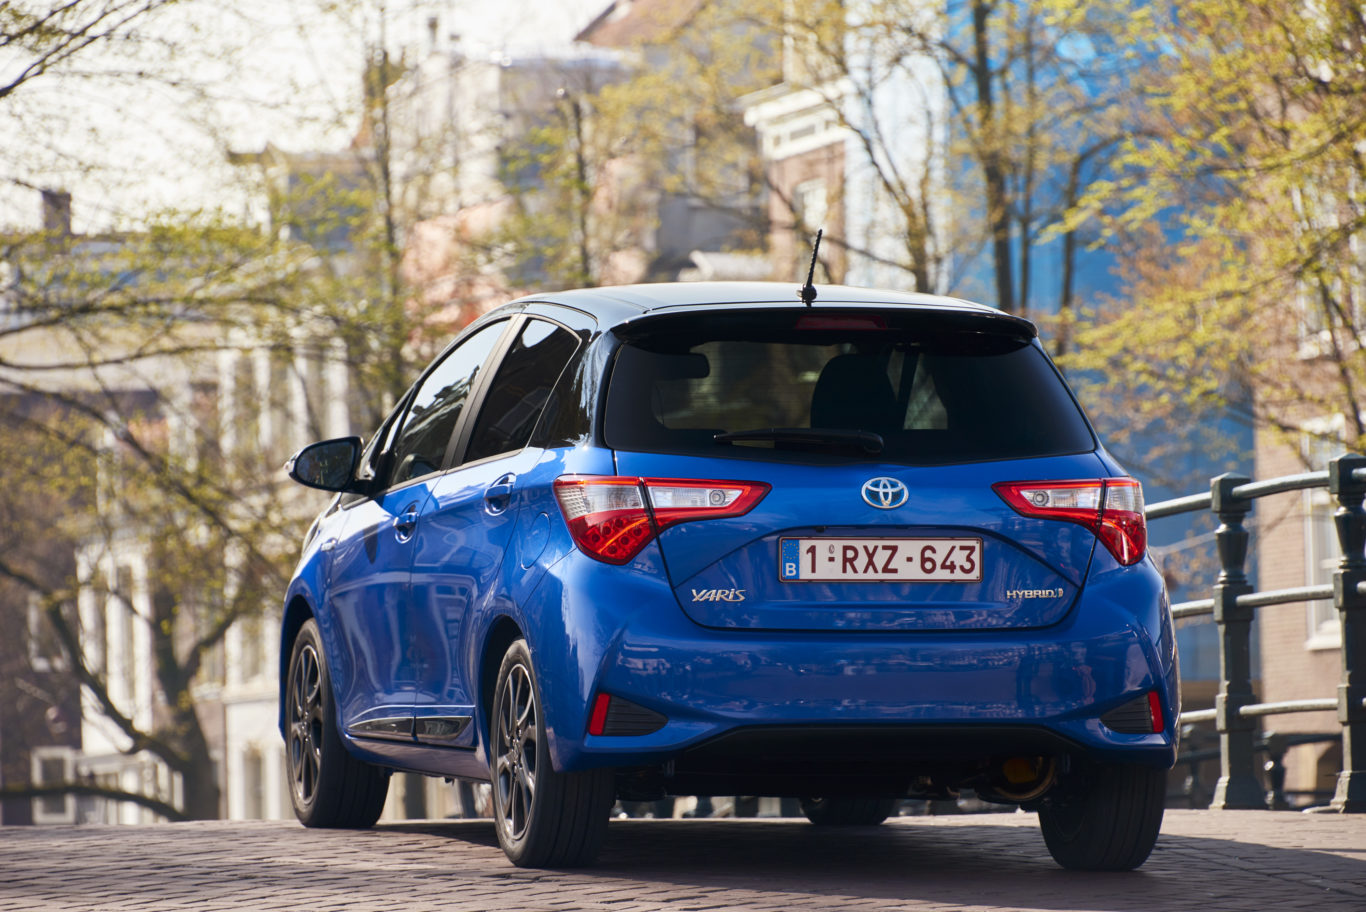 Buyers will likely find the Yaris' low running costs appealing 